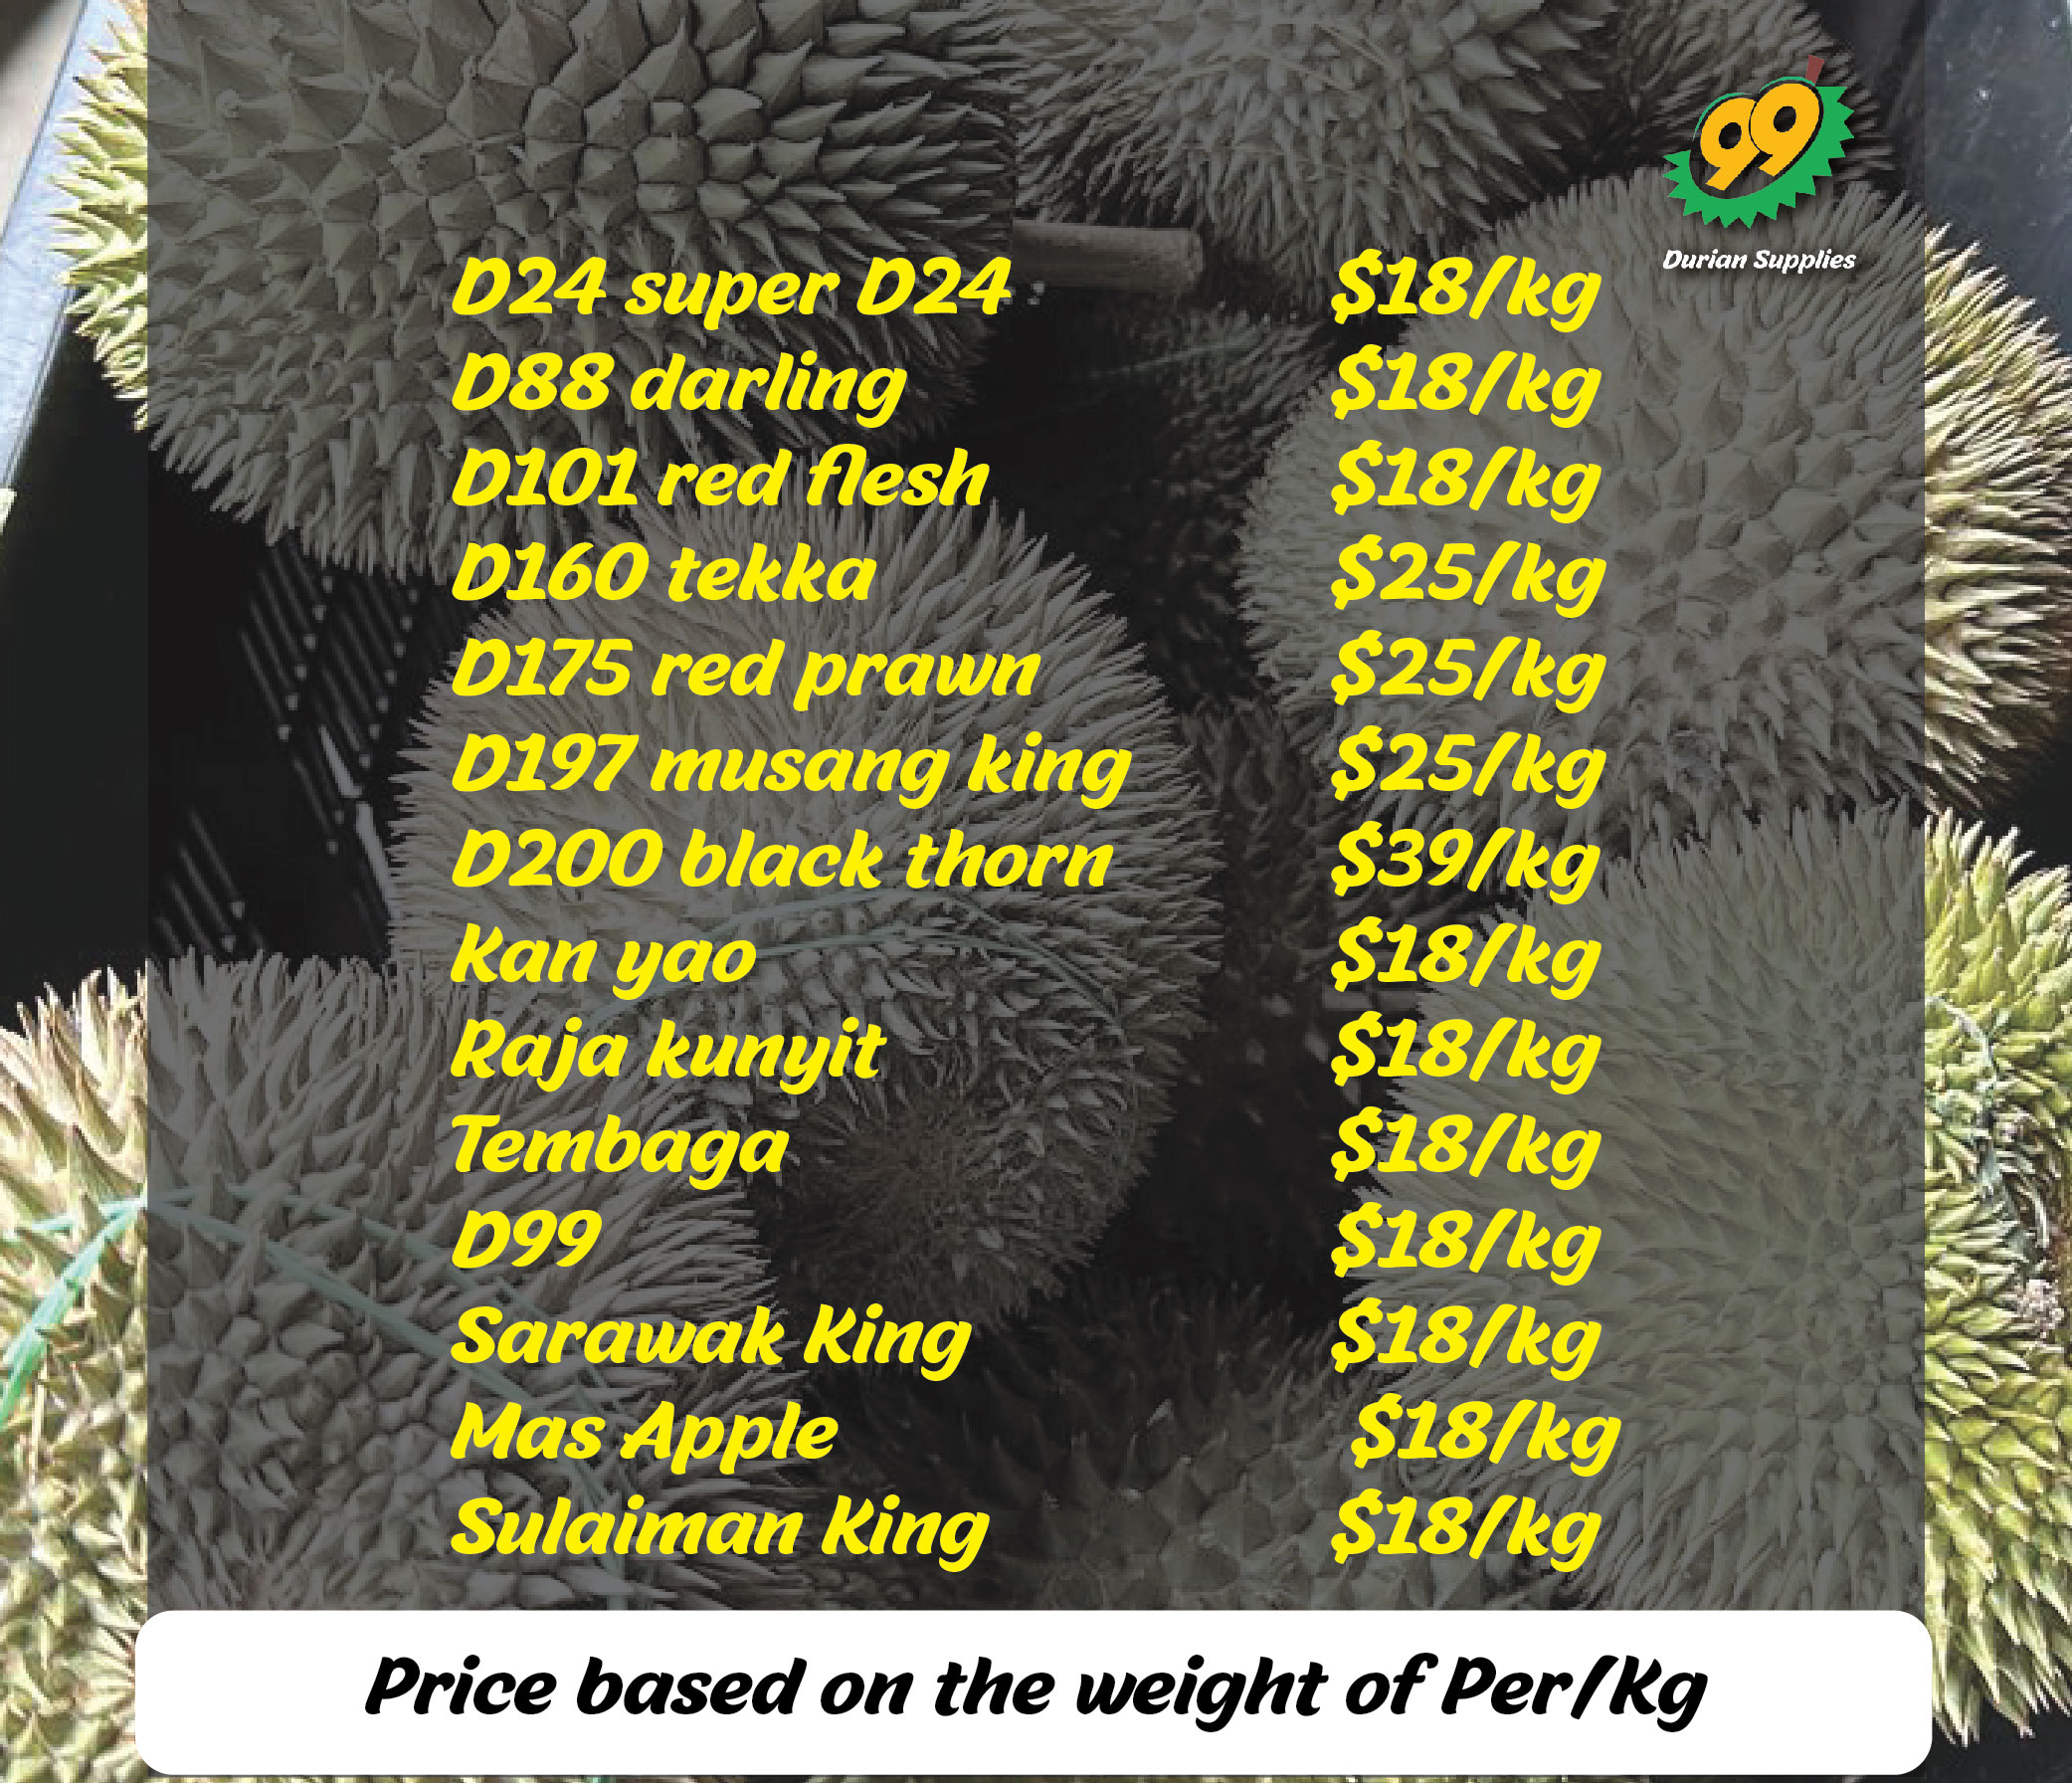 Price list of our Durian